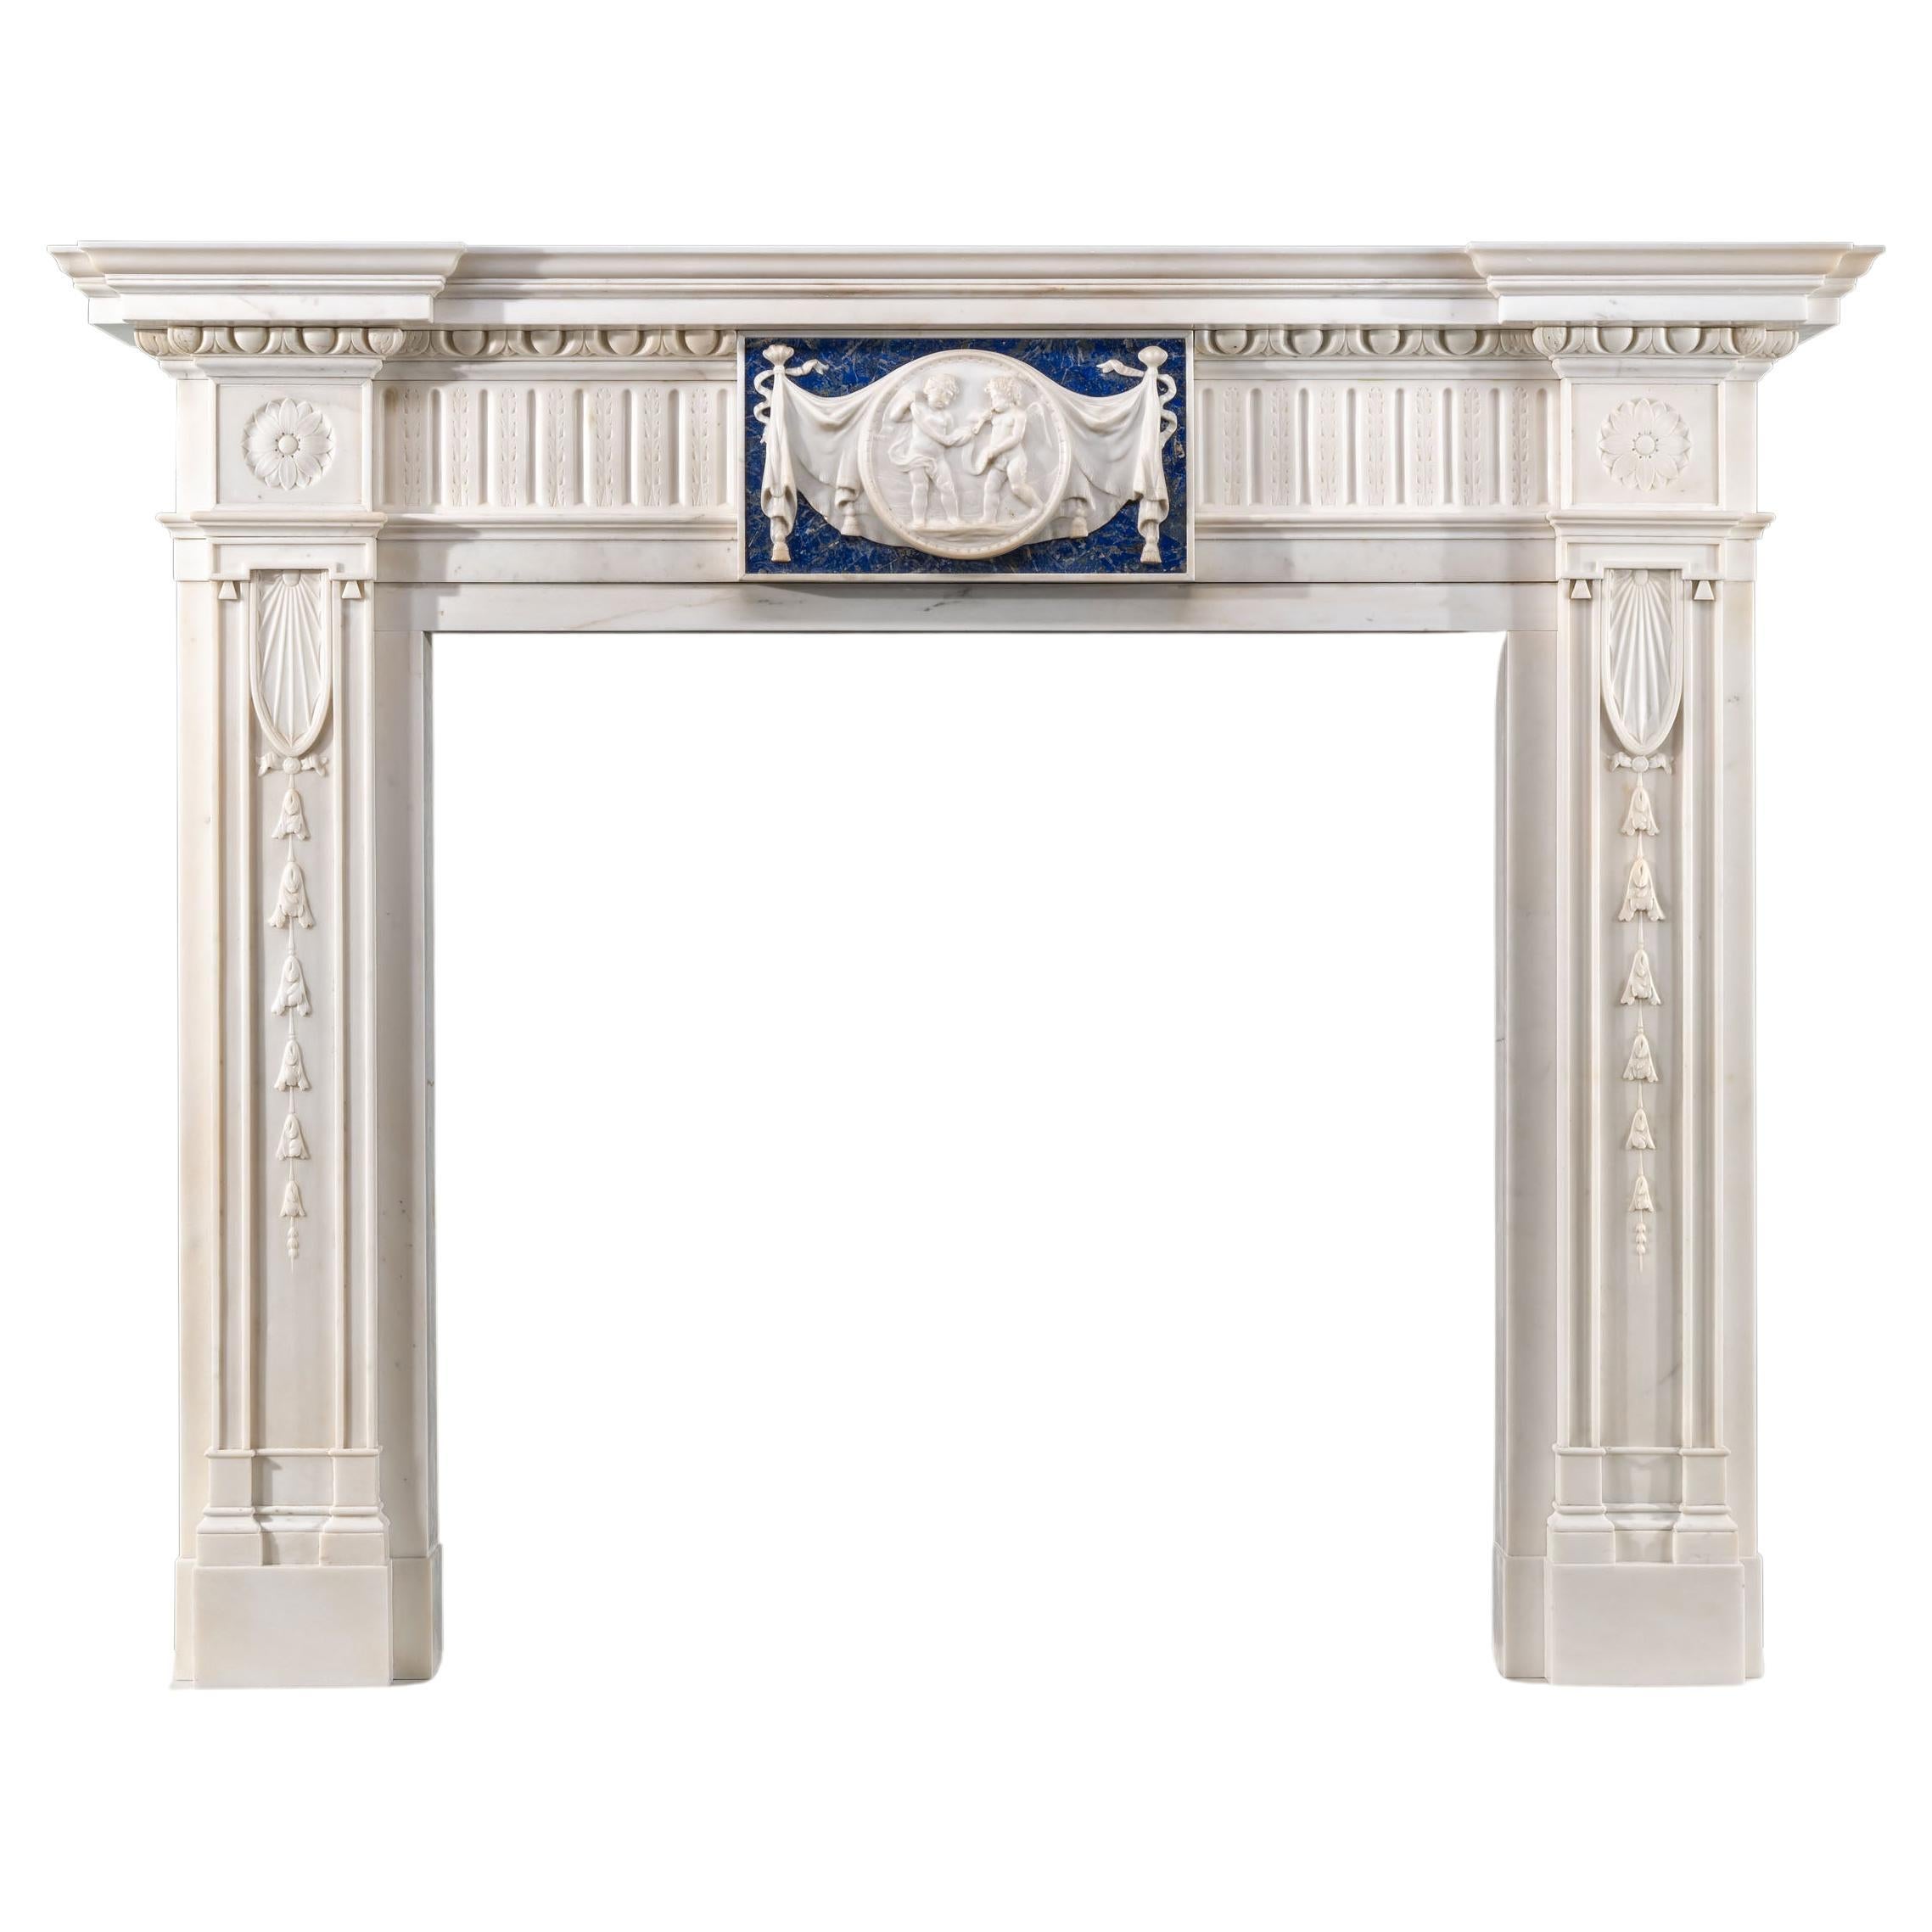 Fine Neoclassical Fireplace in Lapis Lazuli For Sale